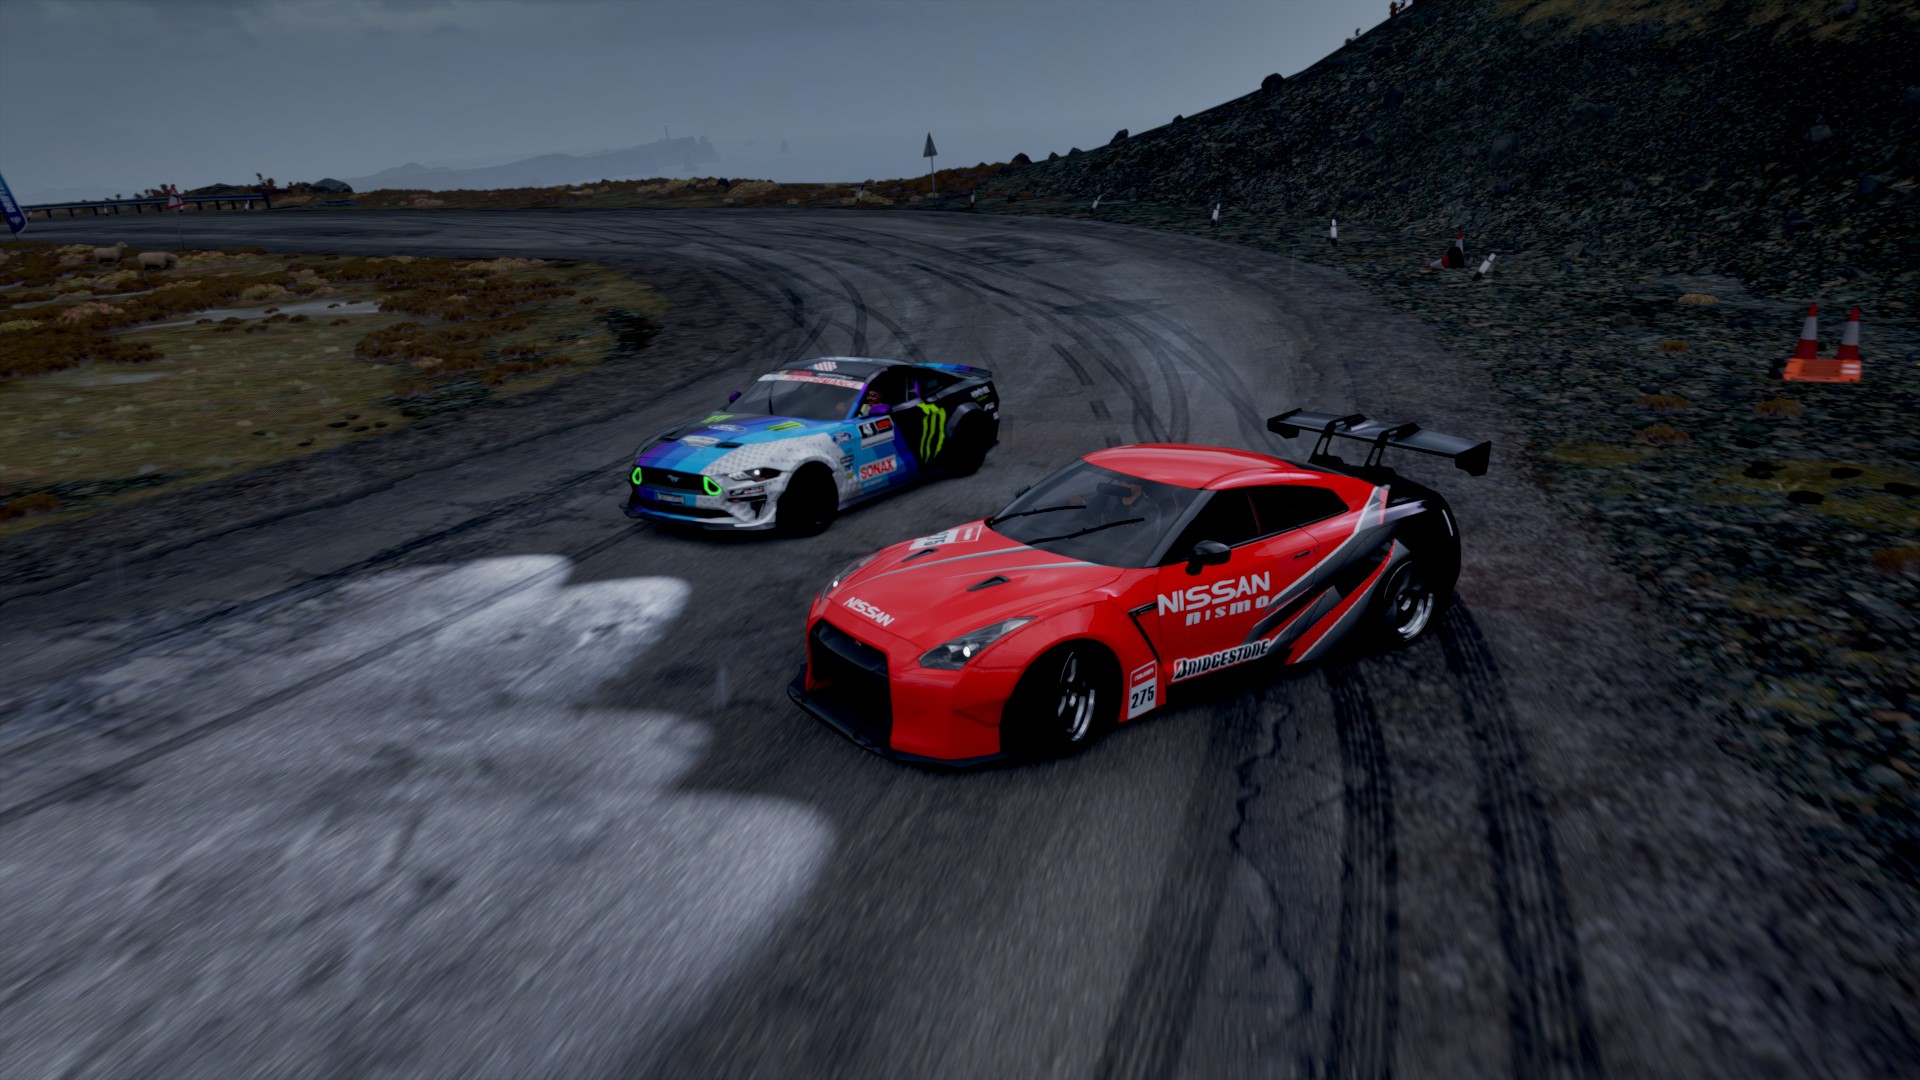 General 1920x1080 Forza Forza Horizon 4 Nissan Nissan GT-R Ford Ford Mustang drift hairpin turns Ford Mustang RTR Ford Mustang S550 livery Japanese cars American cars bodykit PlaygroundGames video games Turn 10 Studios Xbox Game Studios